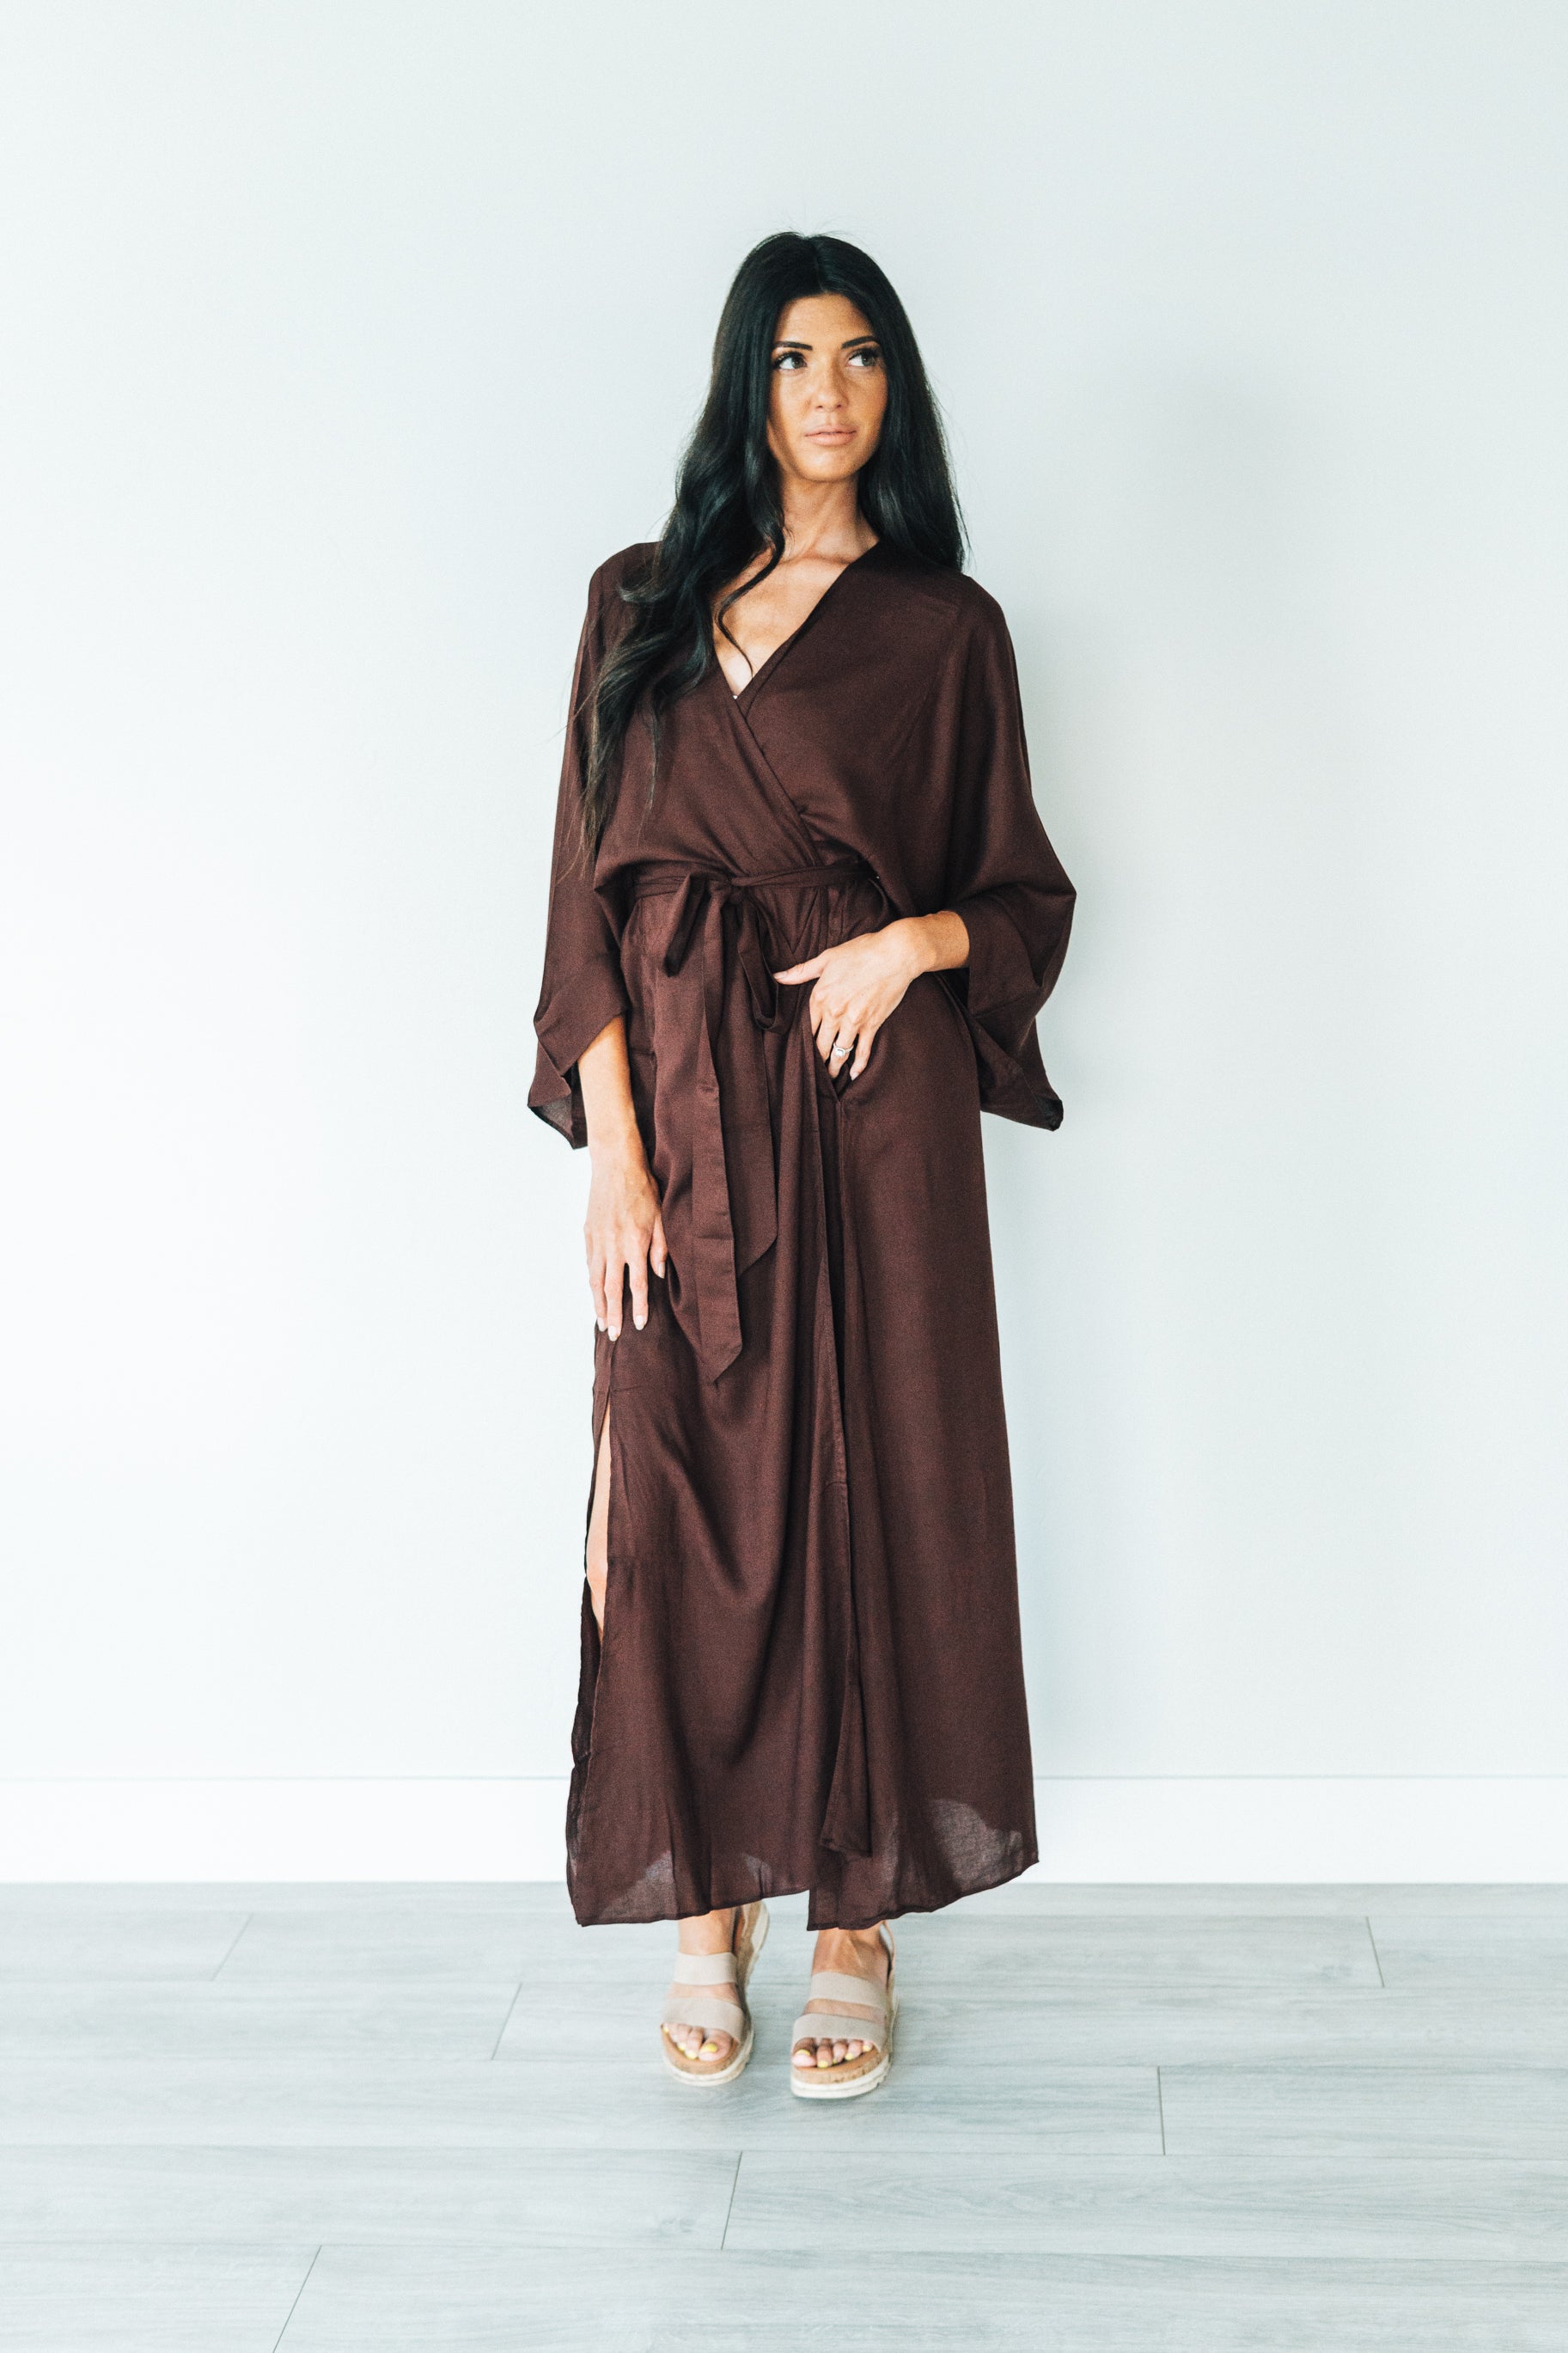 Dark Brown Robe With Pockets, Duster Cardigan, Women Kimono Robe, Bridesmaid Robe, Plus Size Clothing, Duster Robe, Caftan Robe,Spa Cover Up